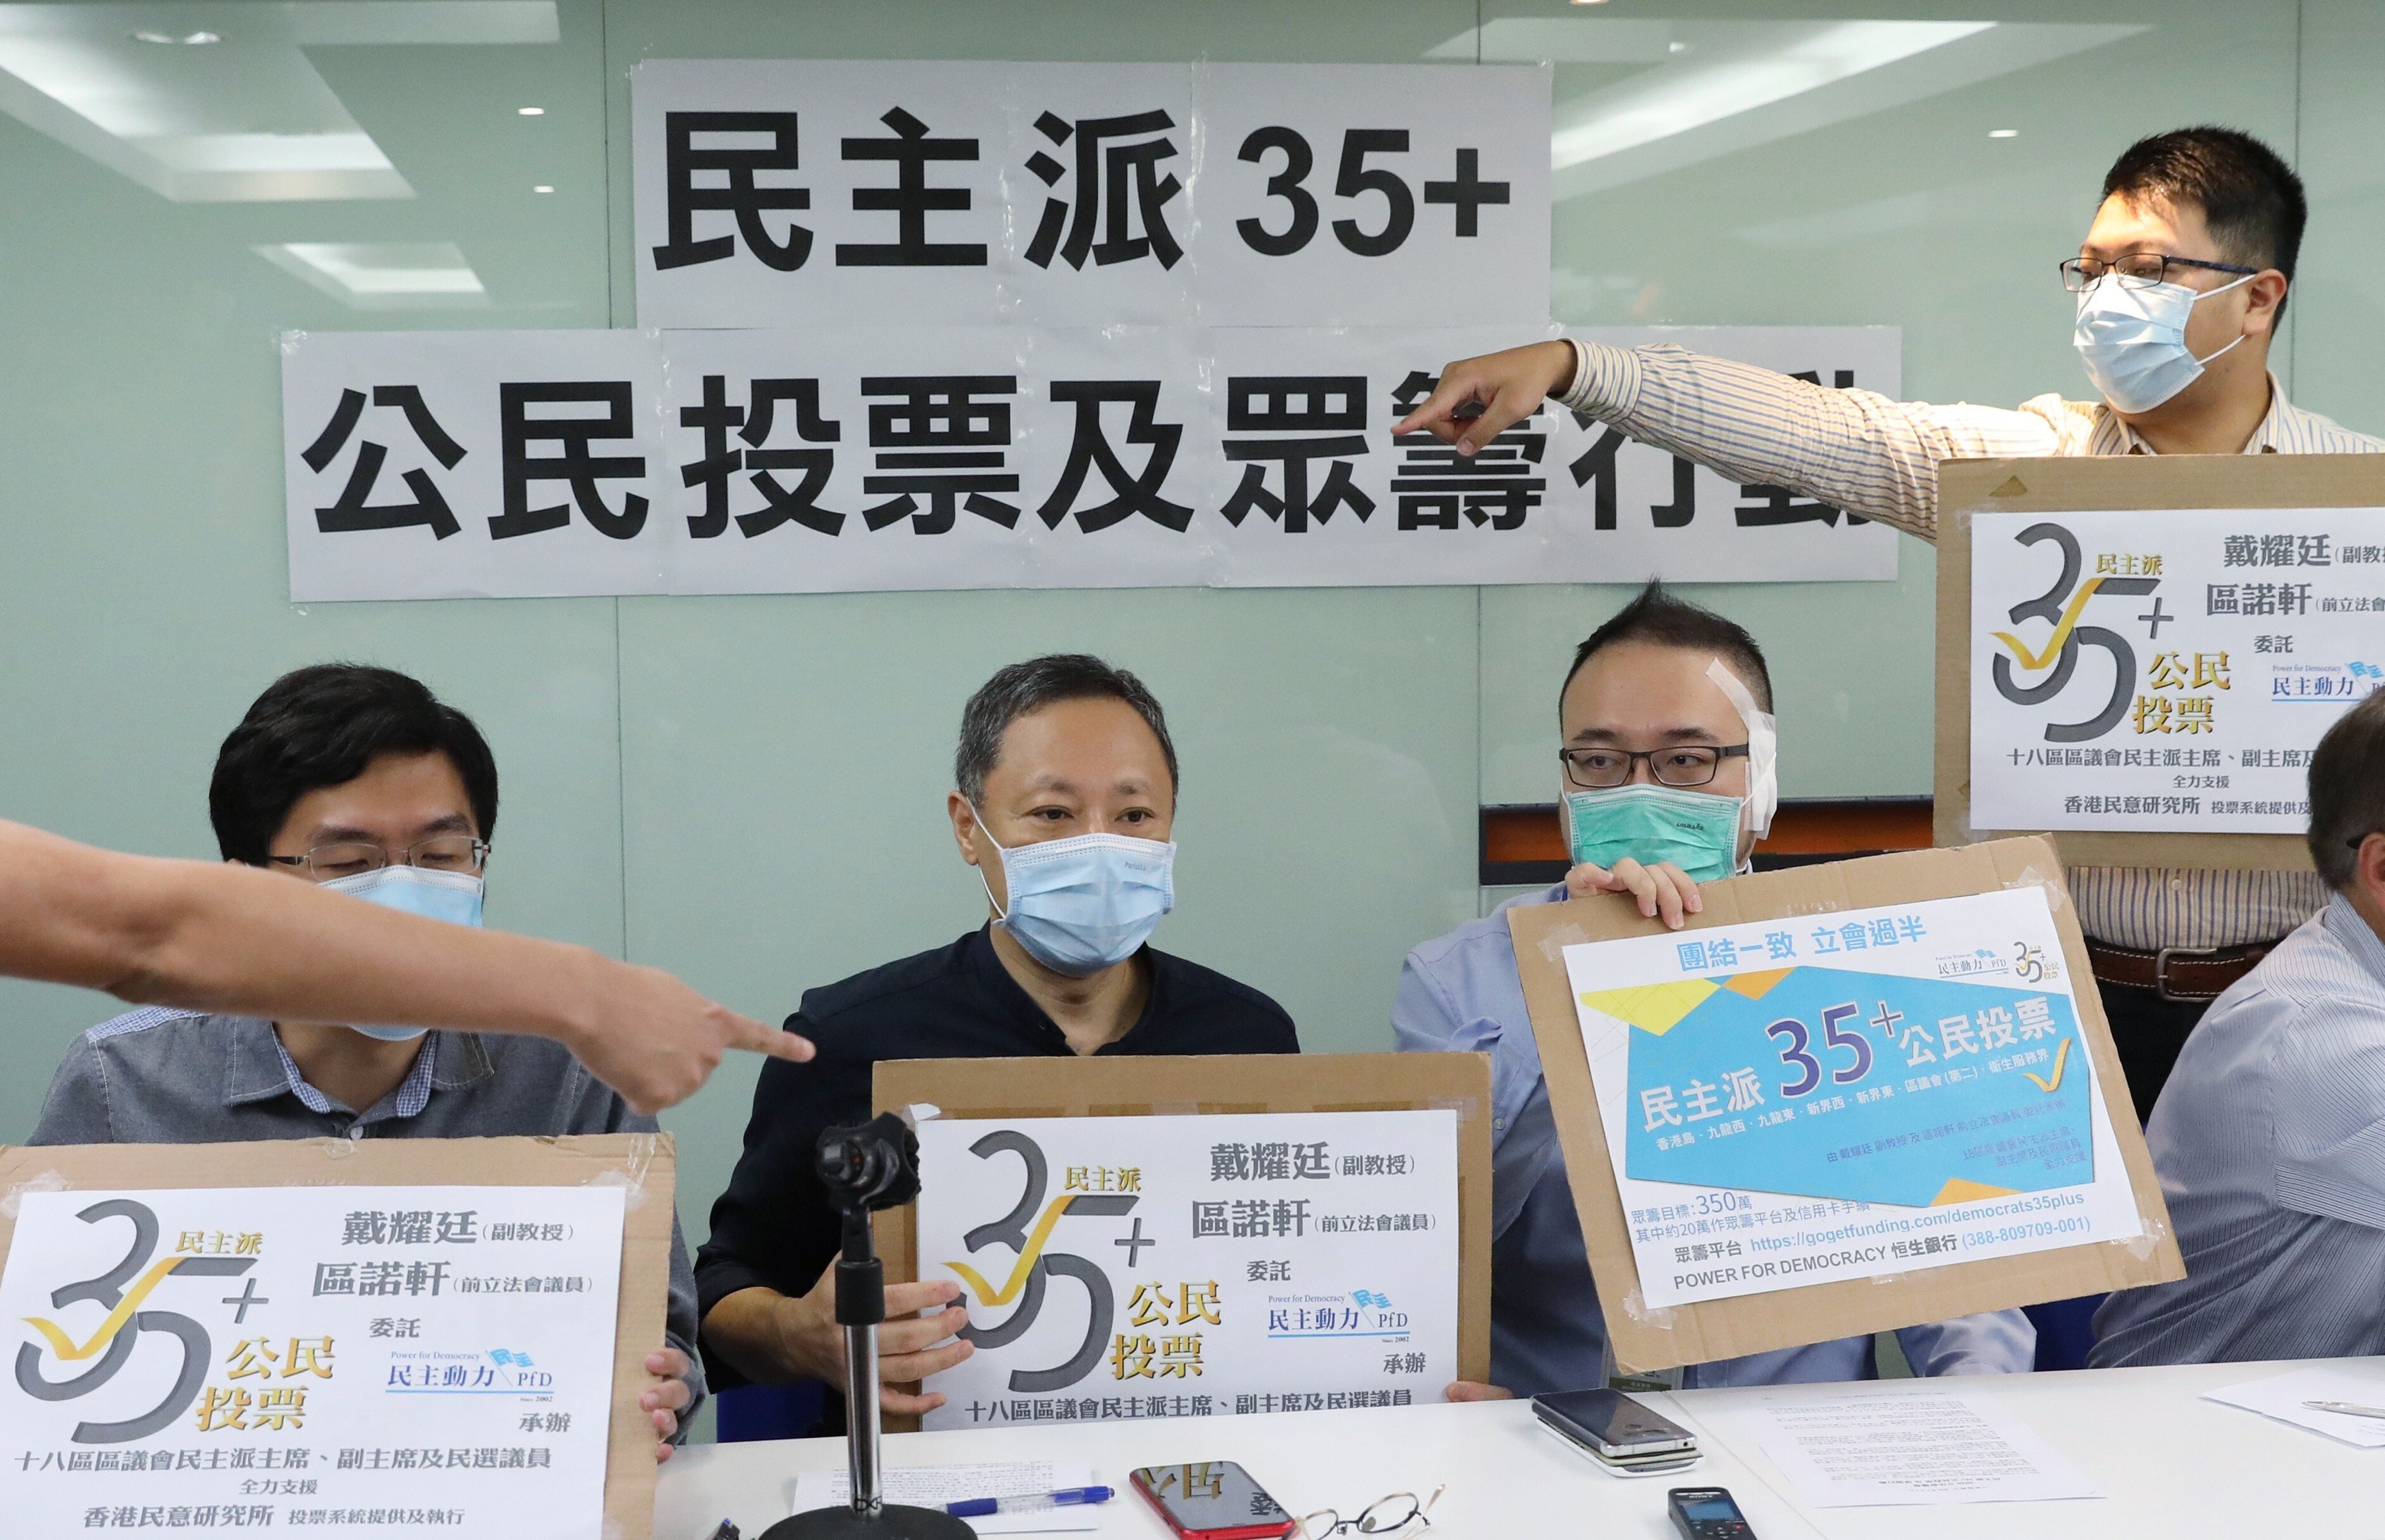 Former lawmaker Au Nok-hin (left), Benny Tai, Power for Democracy convenor Andrew Chiu, and Sai Kung district council chairman Chung Kam-lun, raise awareness for the primary elections last July. Photo: Nora Tam